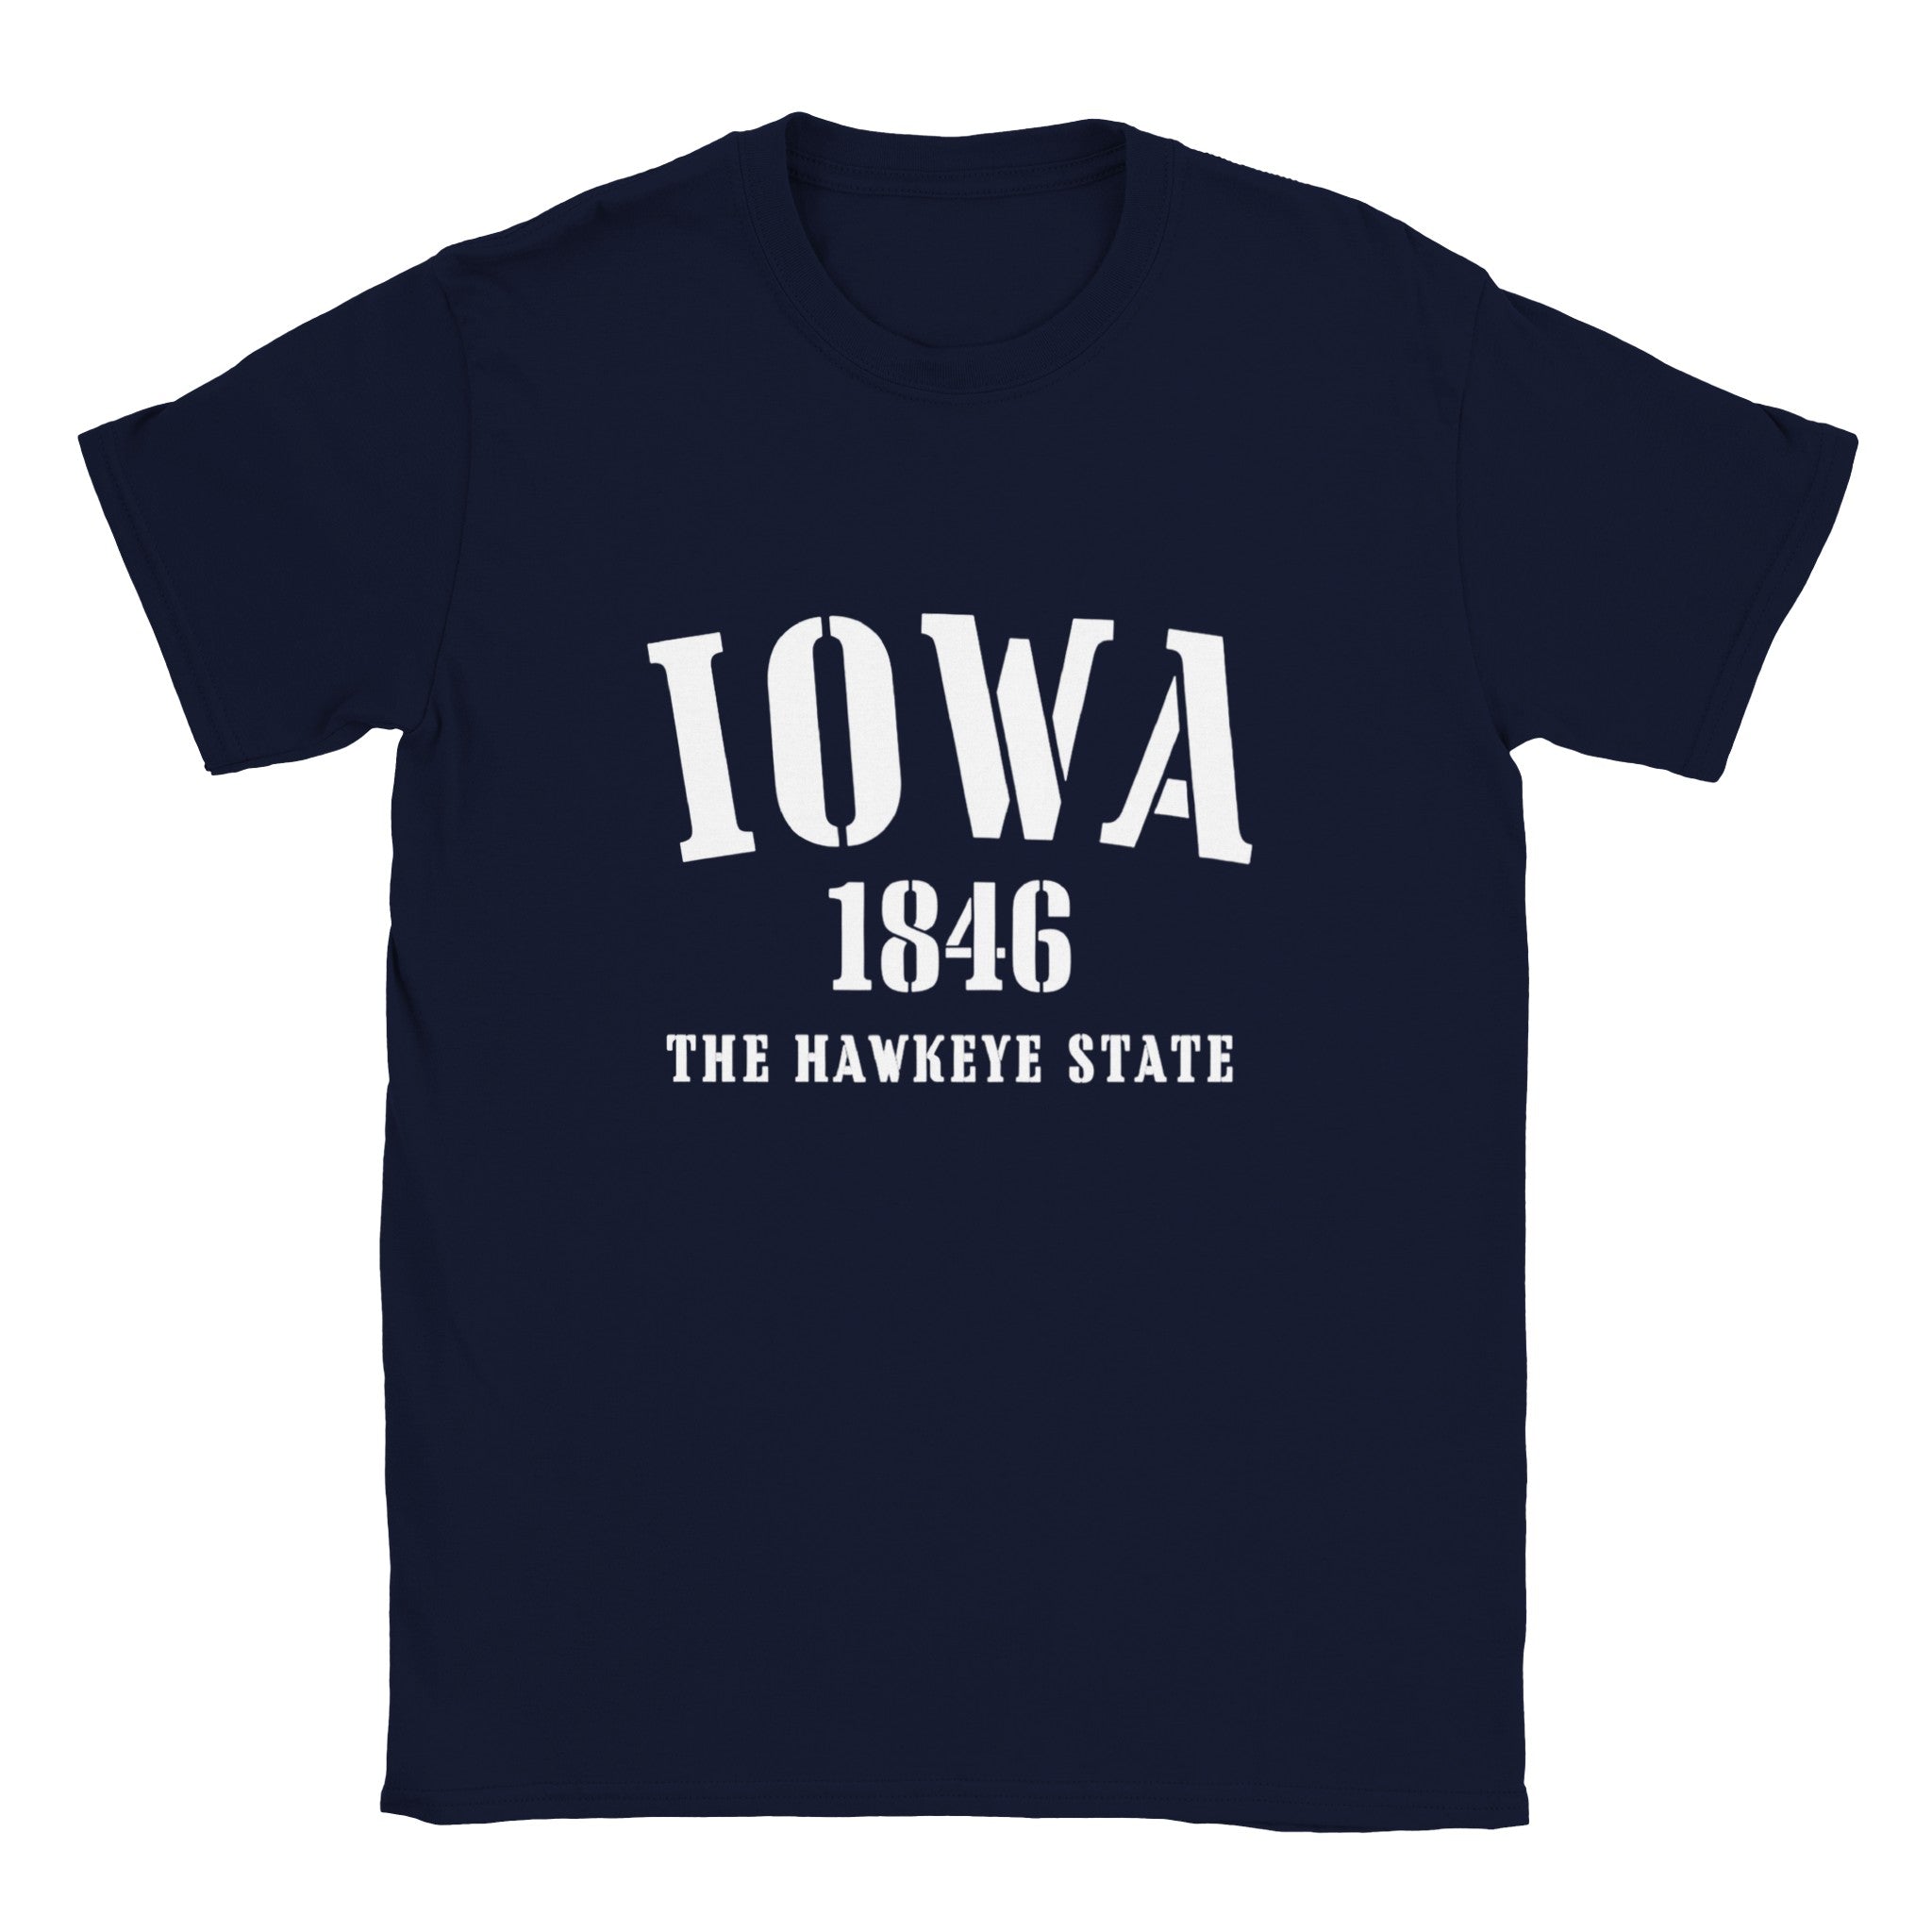 Iowa- Classic Unisex Crewneck States T-shirt - Creations by Chris and Carlos